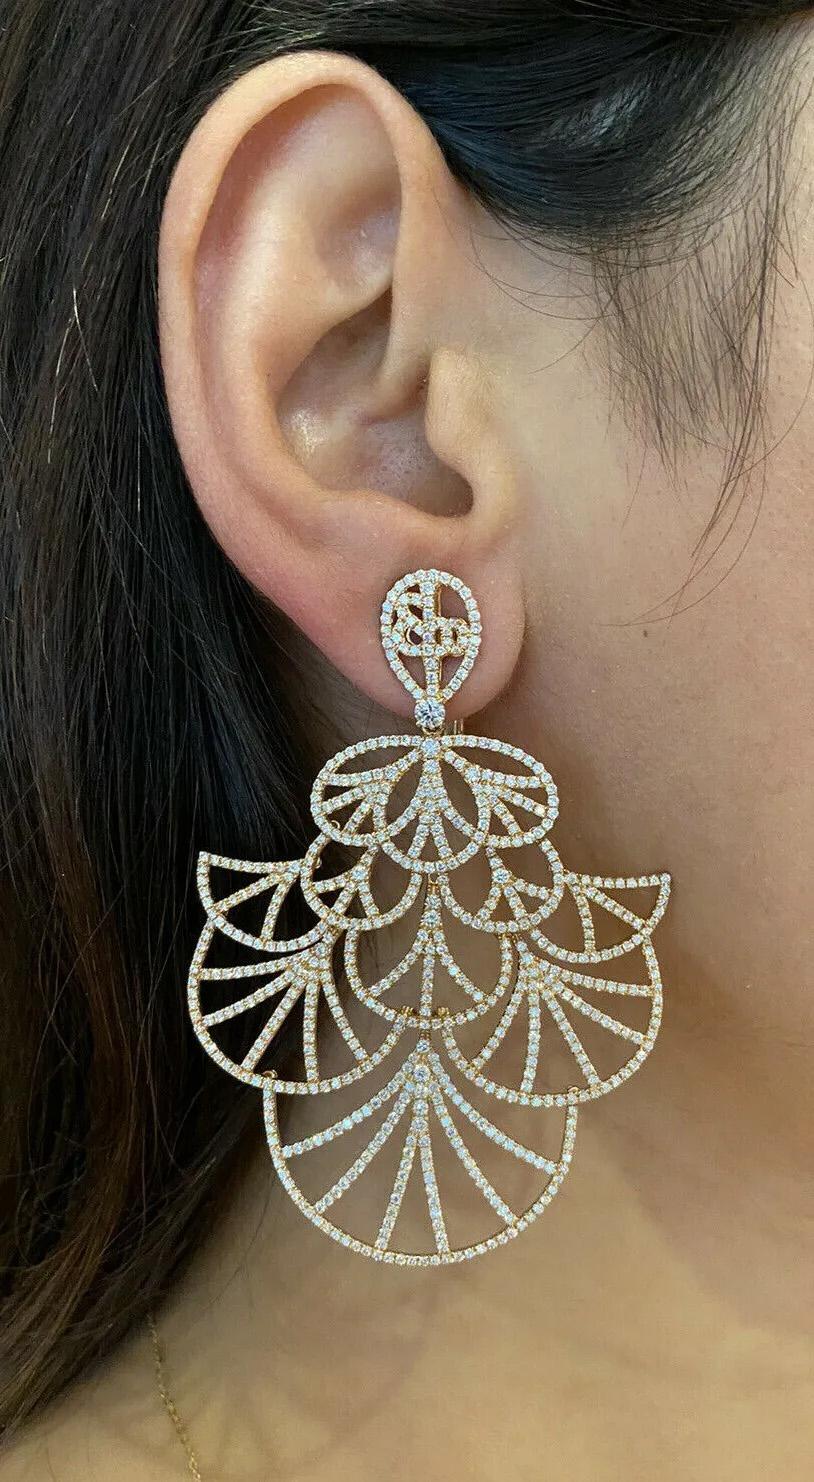 Tiered Diamond Chandelier Earrings with 9.50 carats total weight in 18k Rose Gold

Large Diamond Chandelier Earrings features Tiered layers of Fan-shaped sections encrusted with 9.50 carats of Natural Round Brilliant Diamonds set in 18k Rose